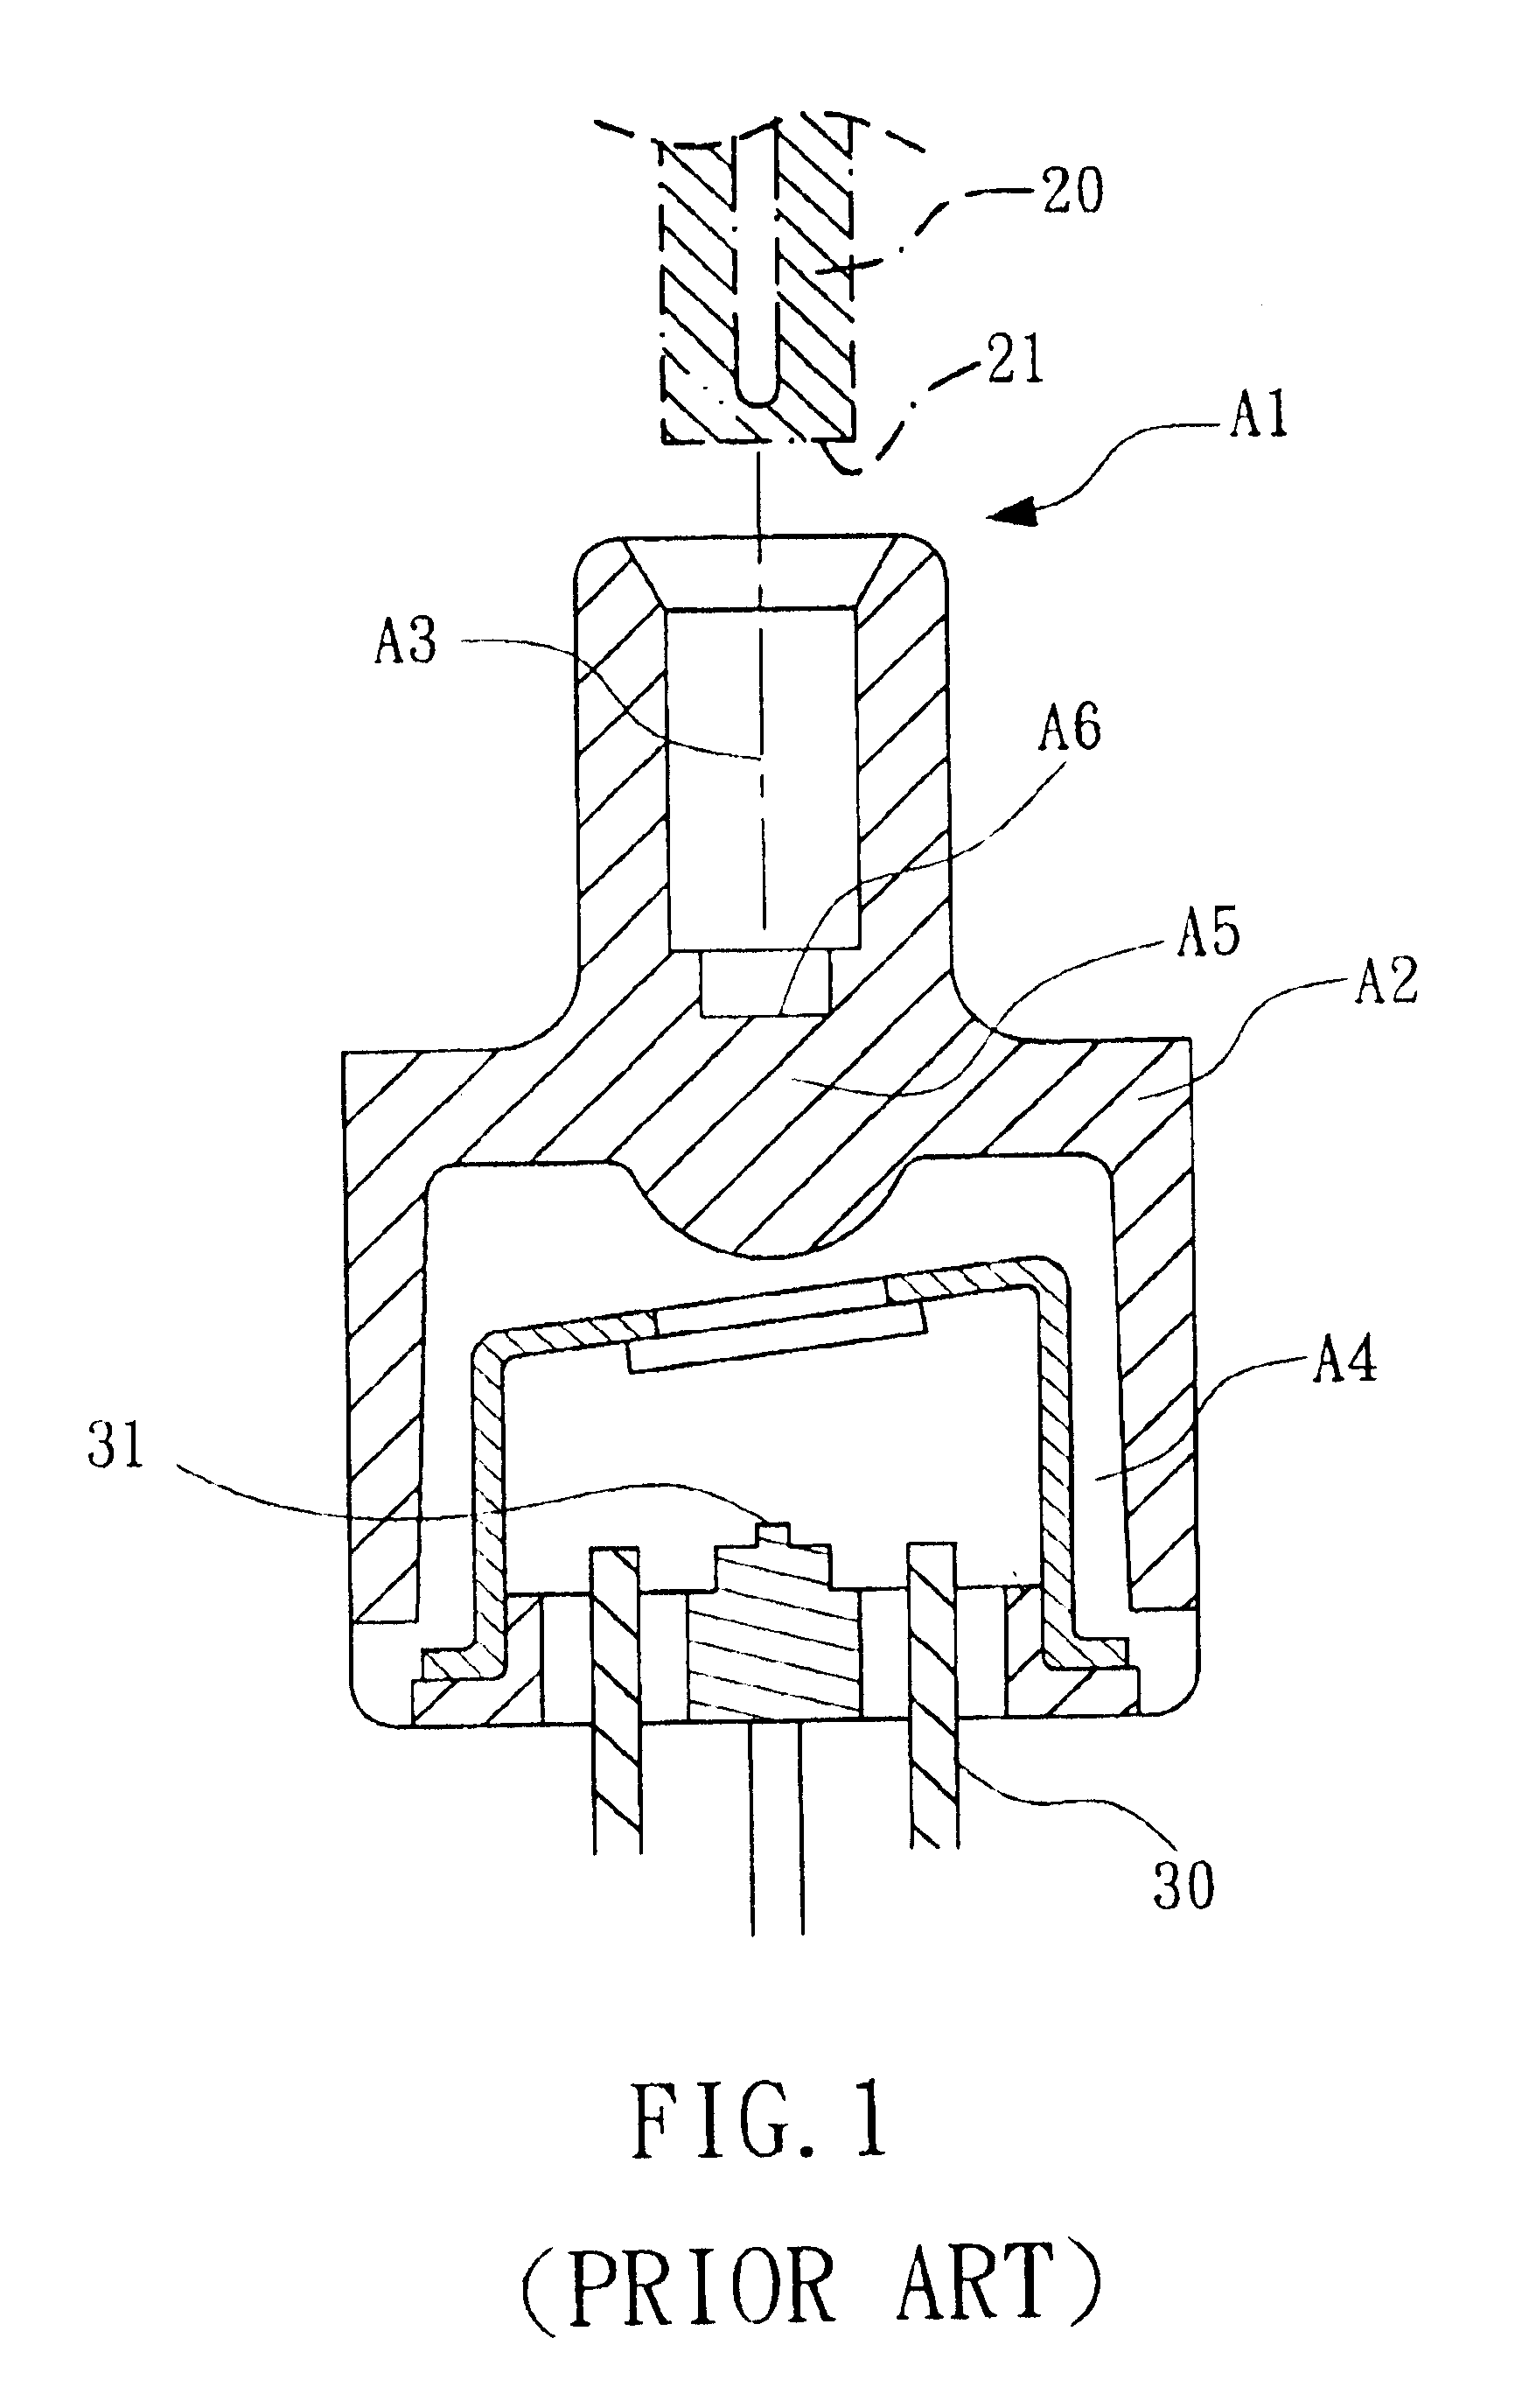 Method for measuring and assembling transceiver optical sub-assembly